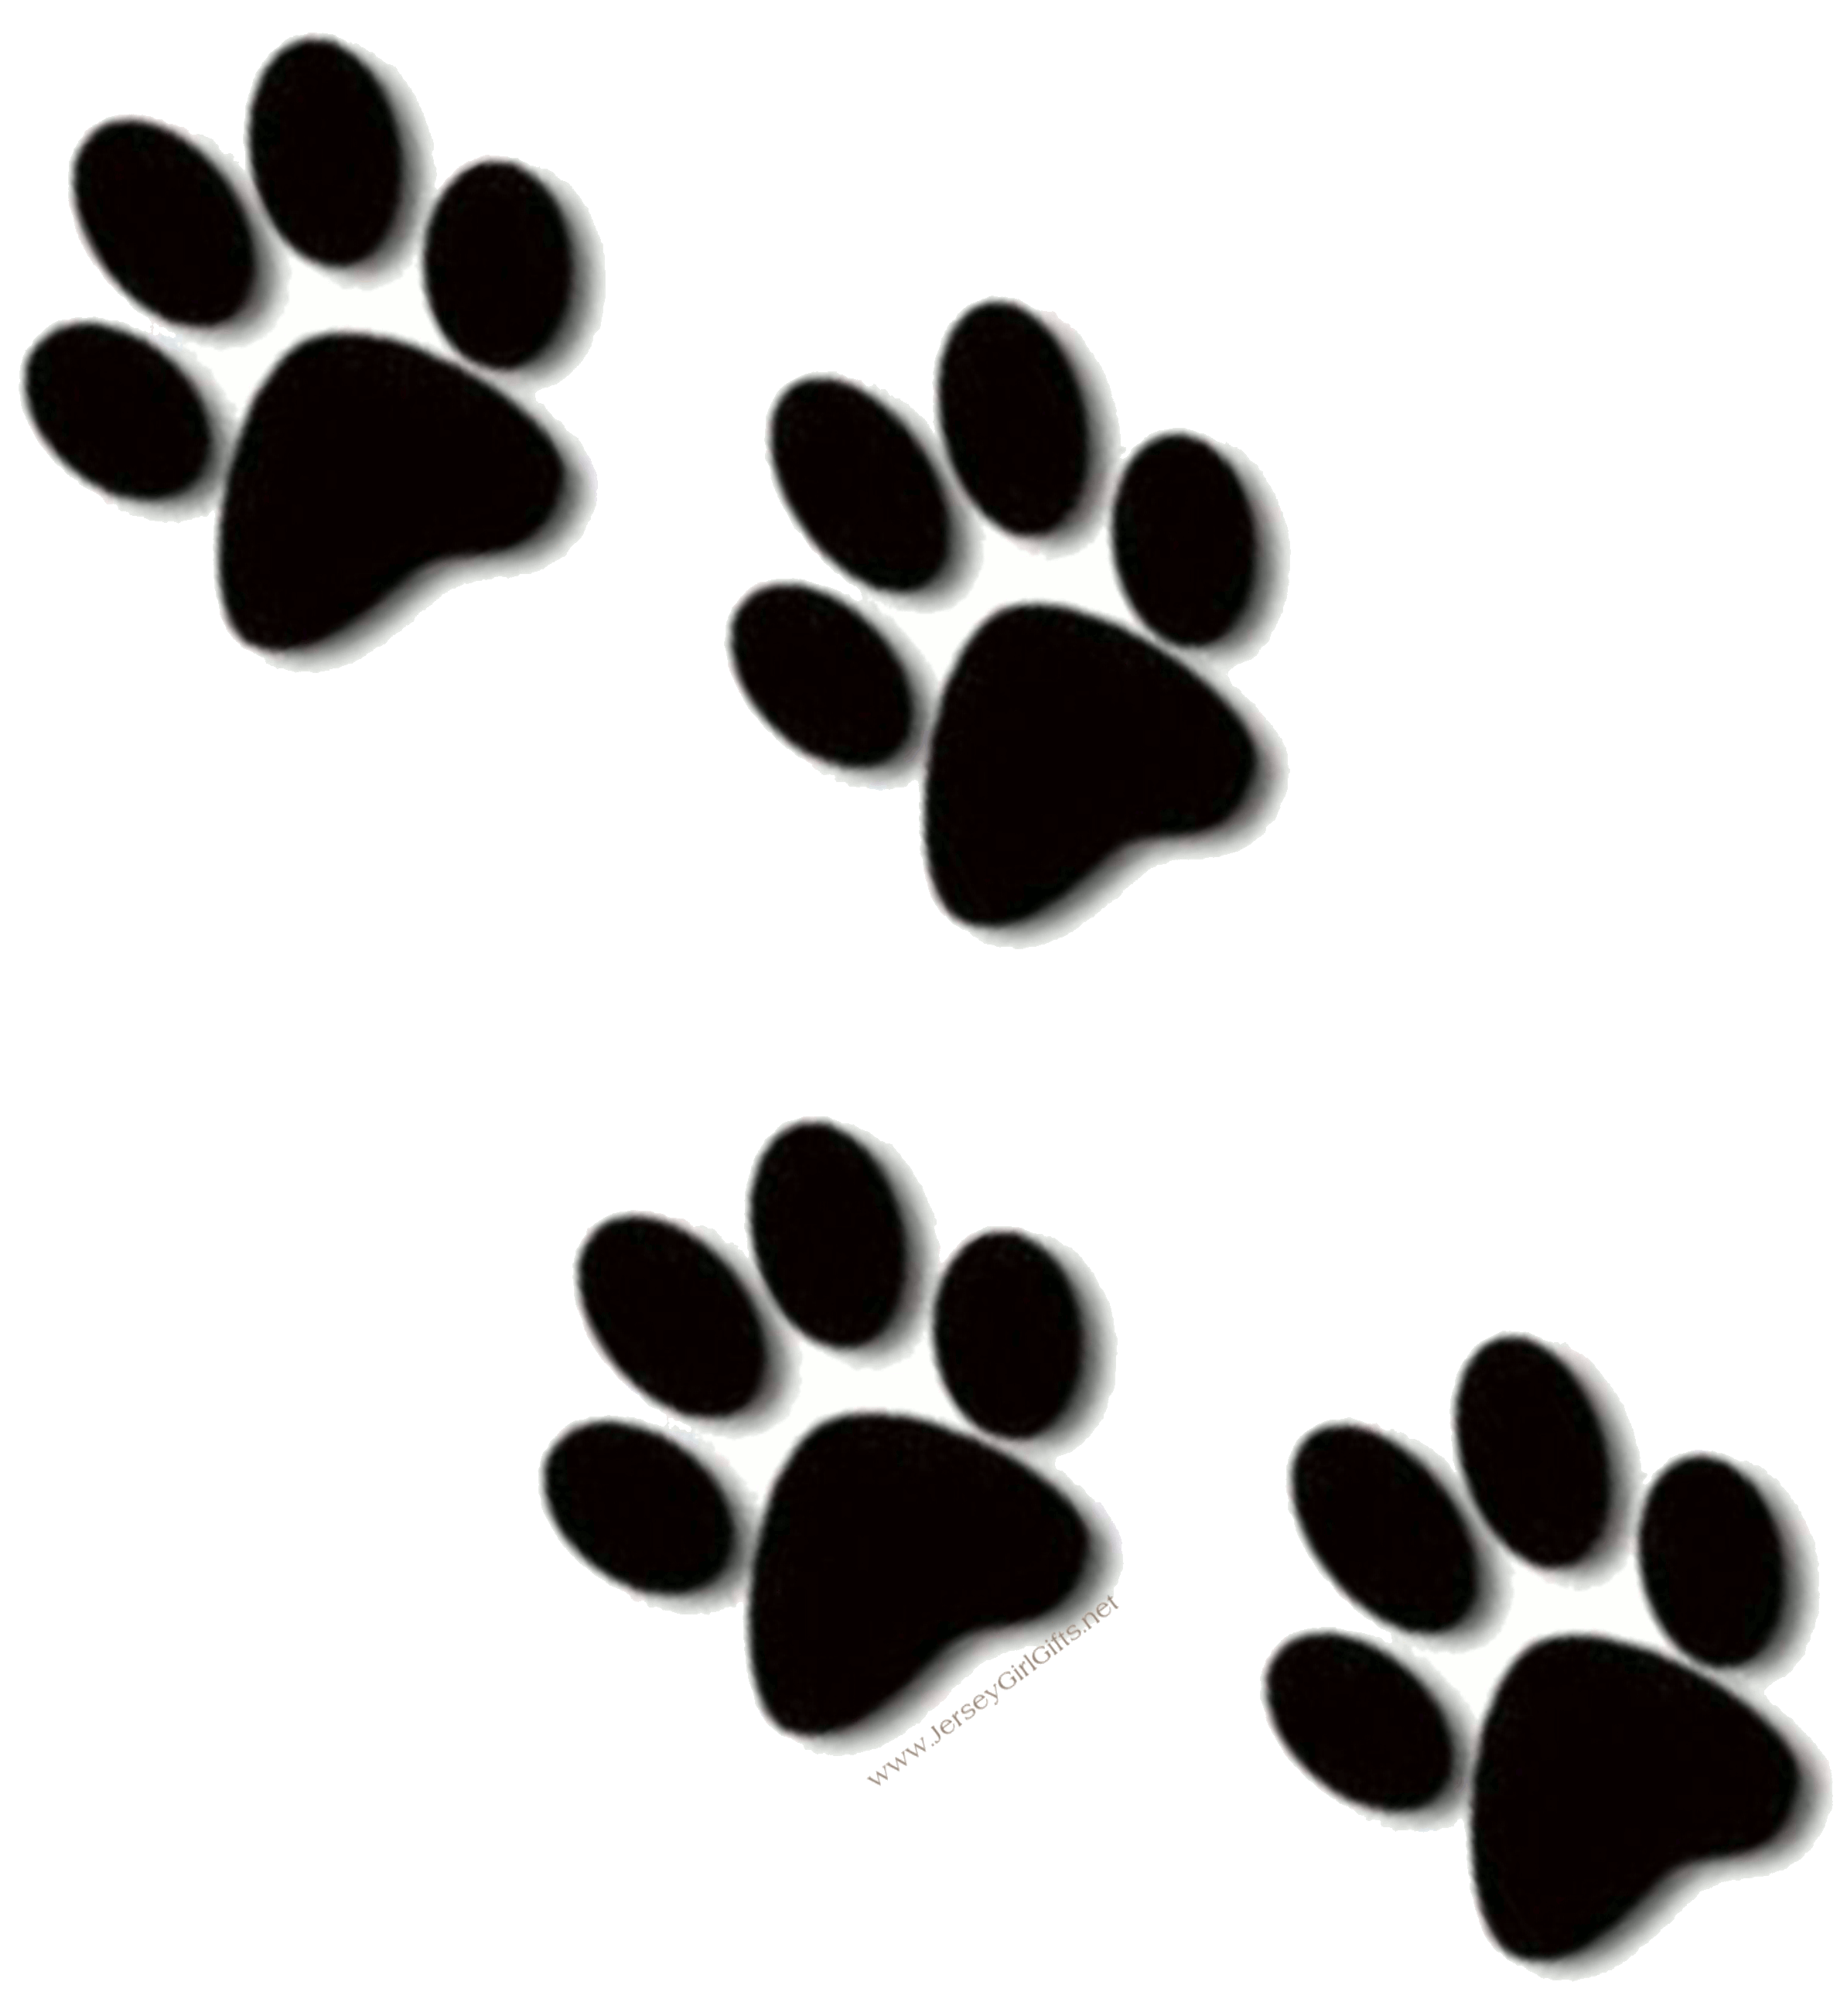 paw clipart artistic